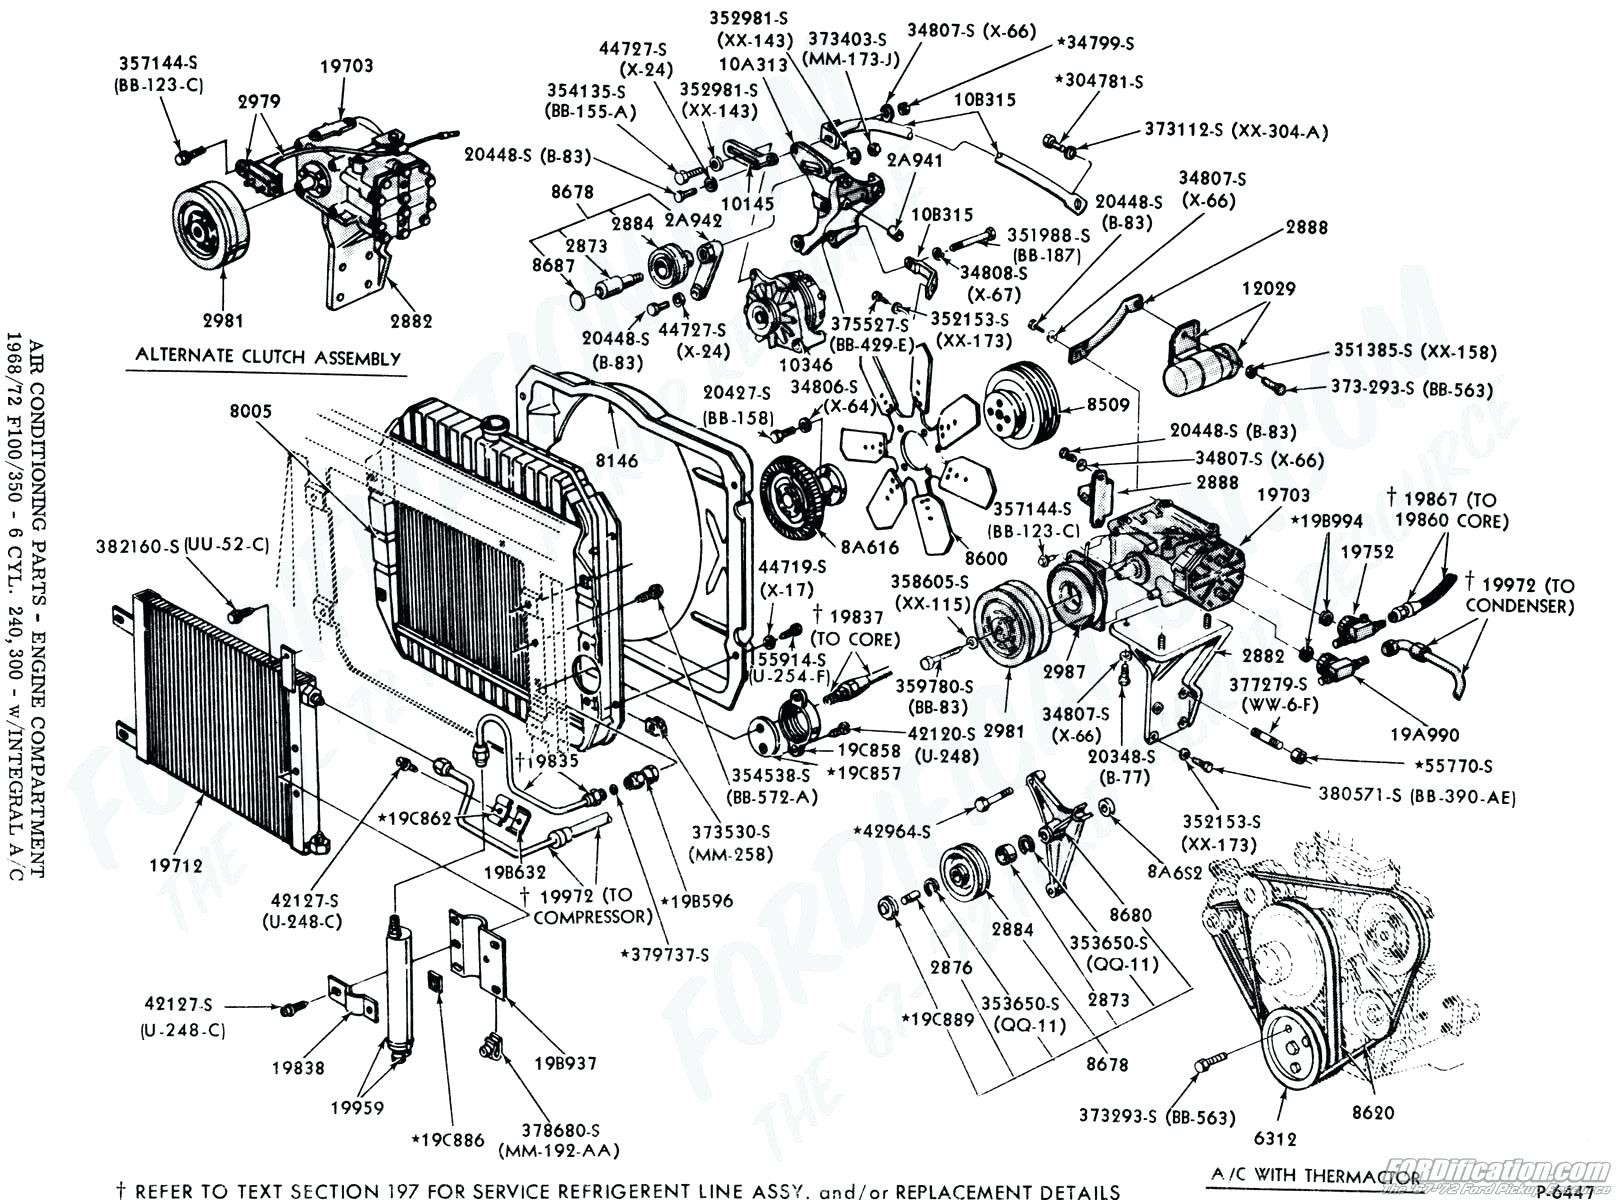 Official Ford 302 Engine Diagram - Wiring Diagram